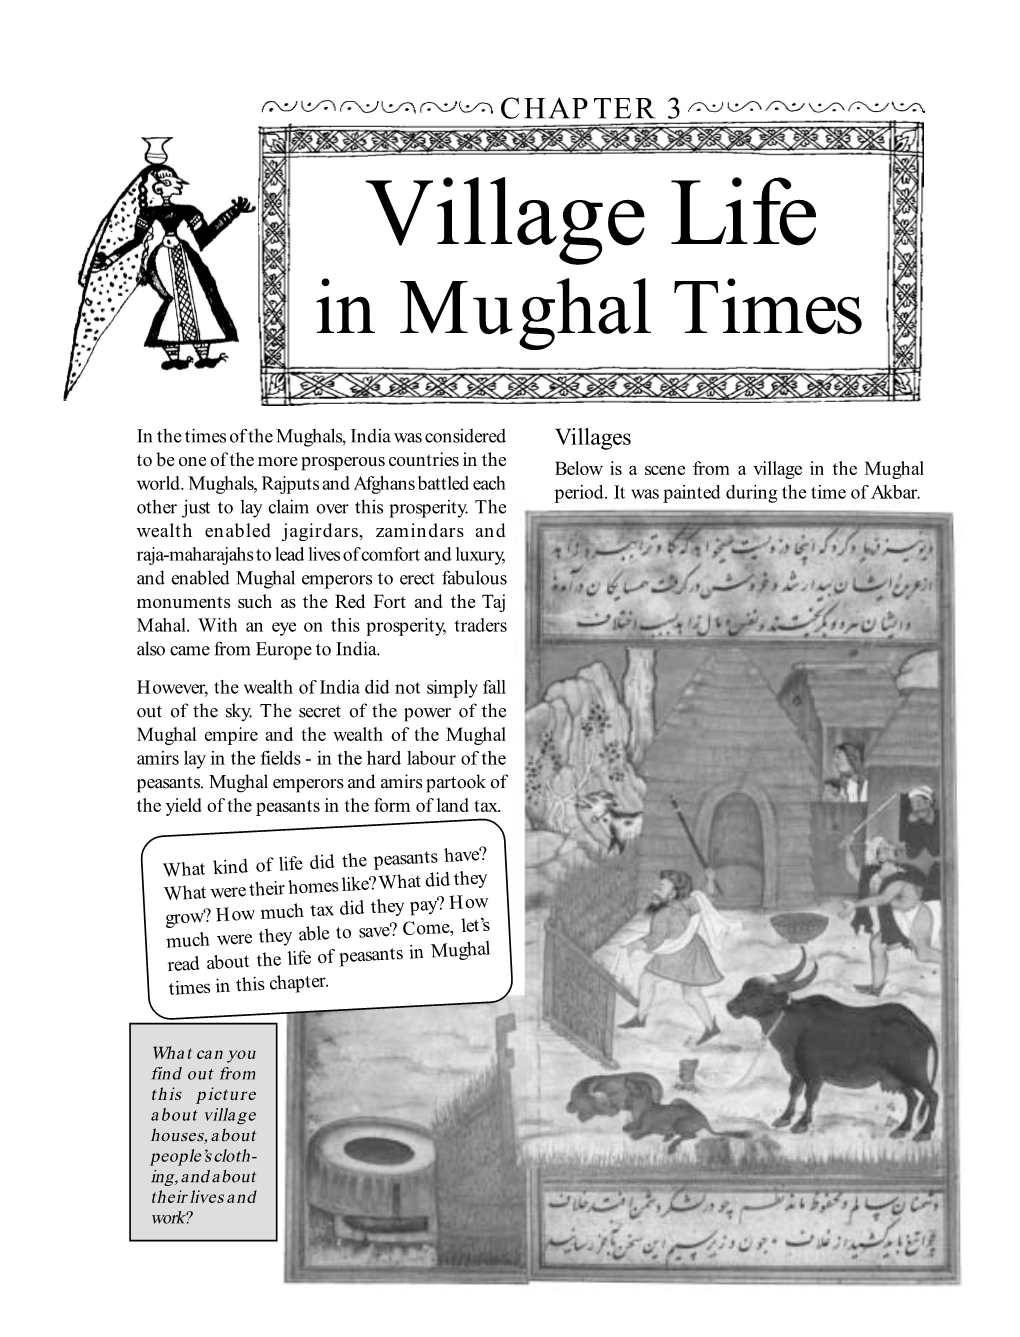 Village Life in Mughal Times